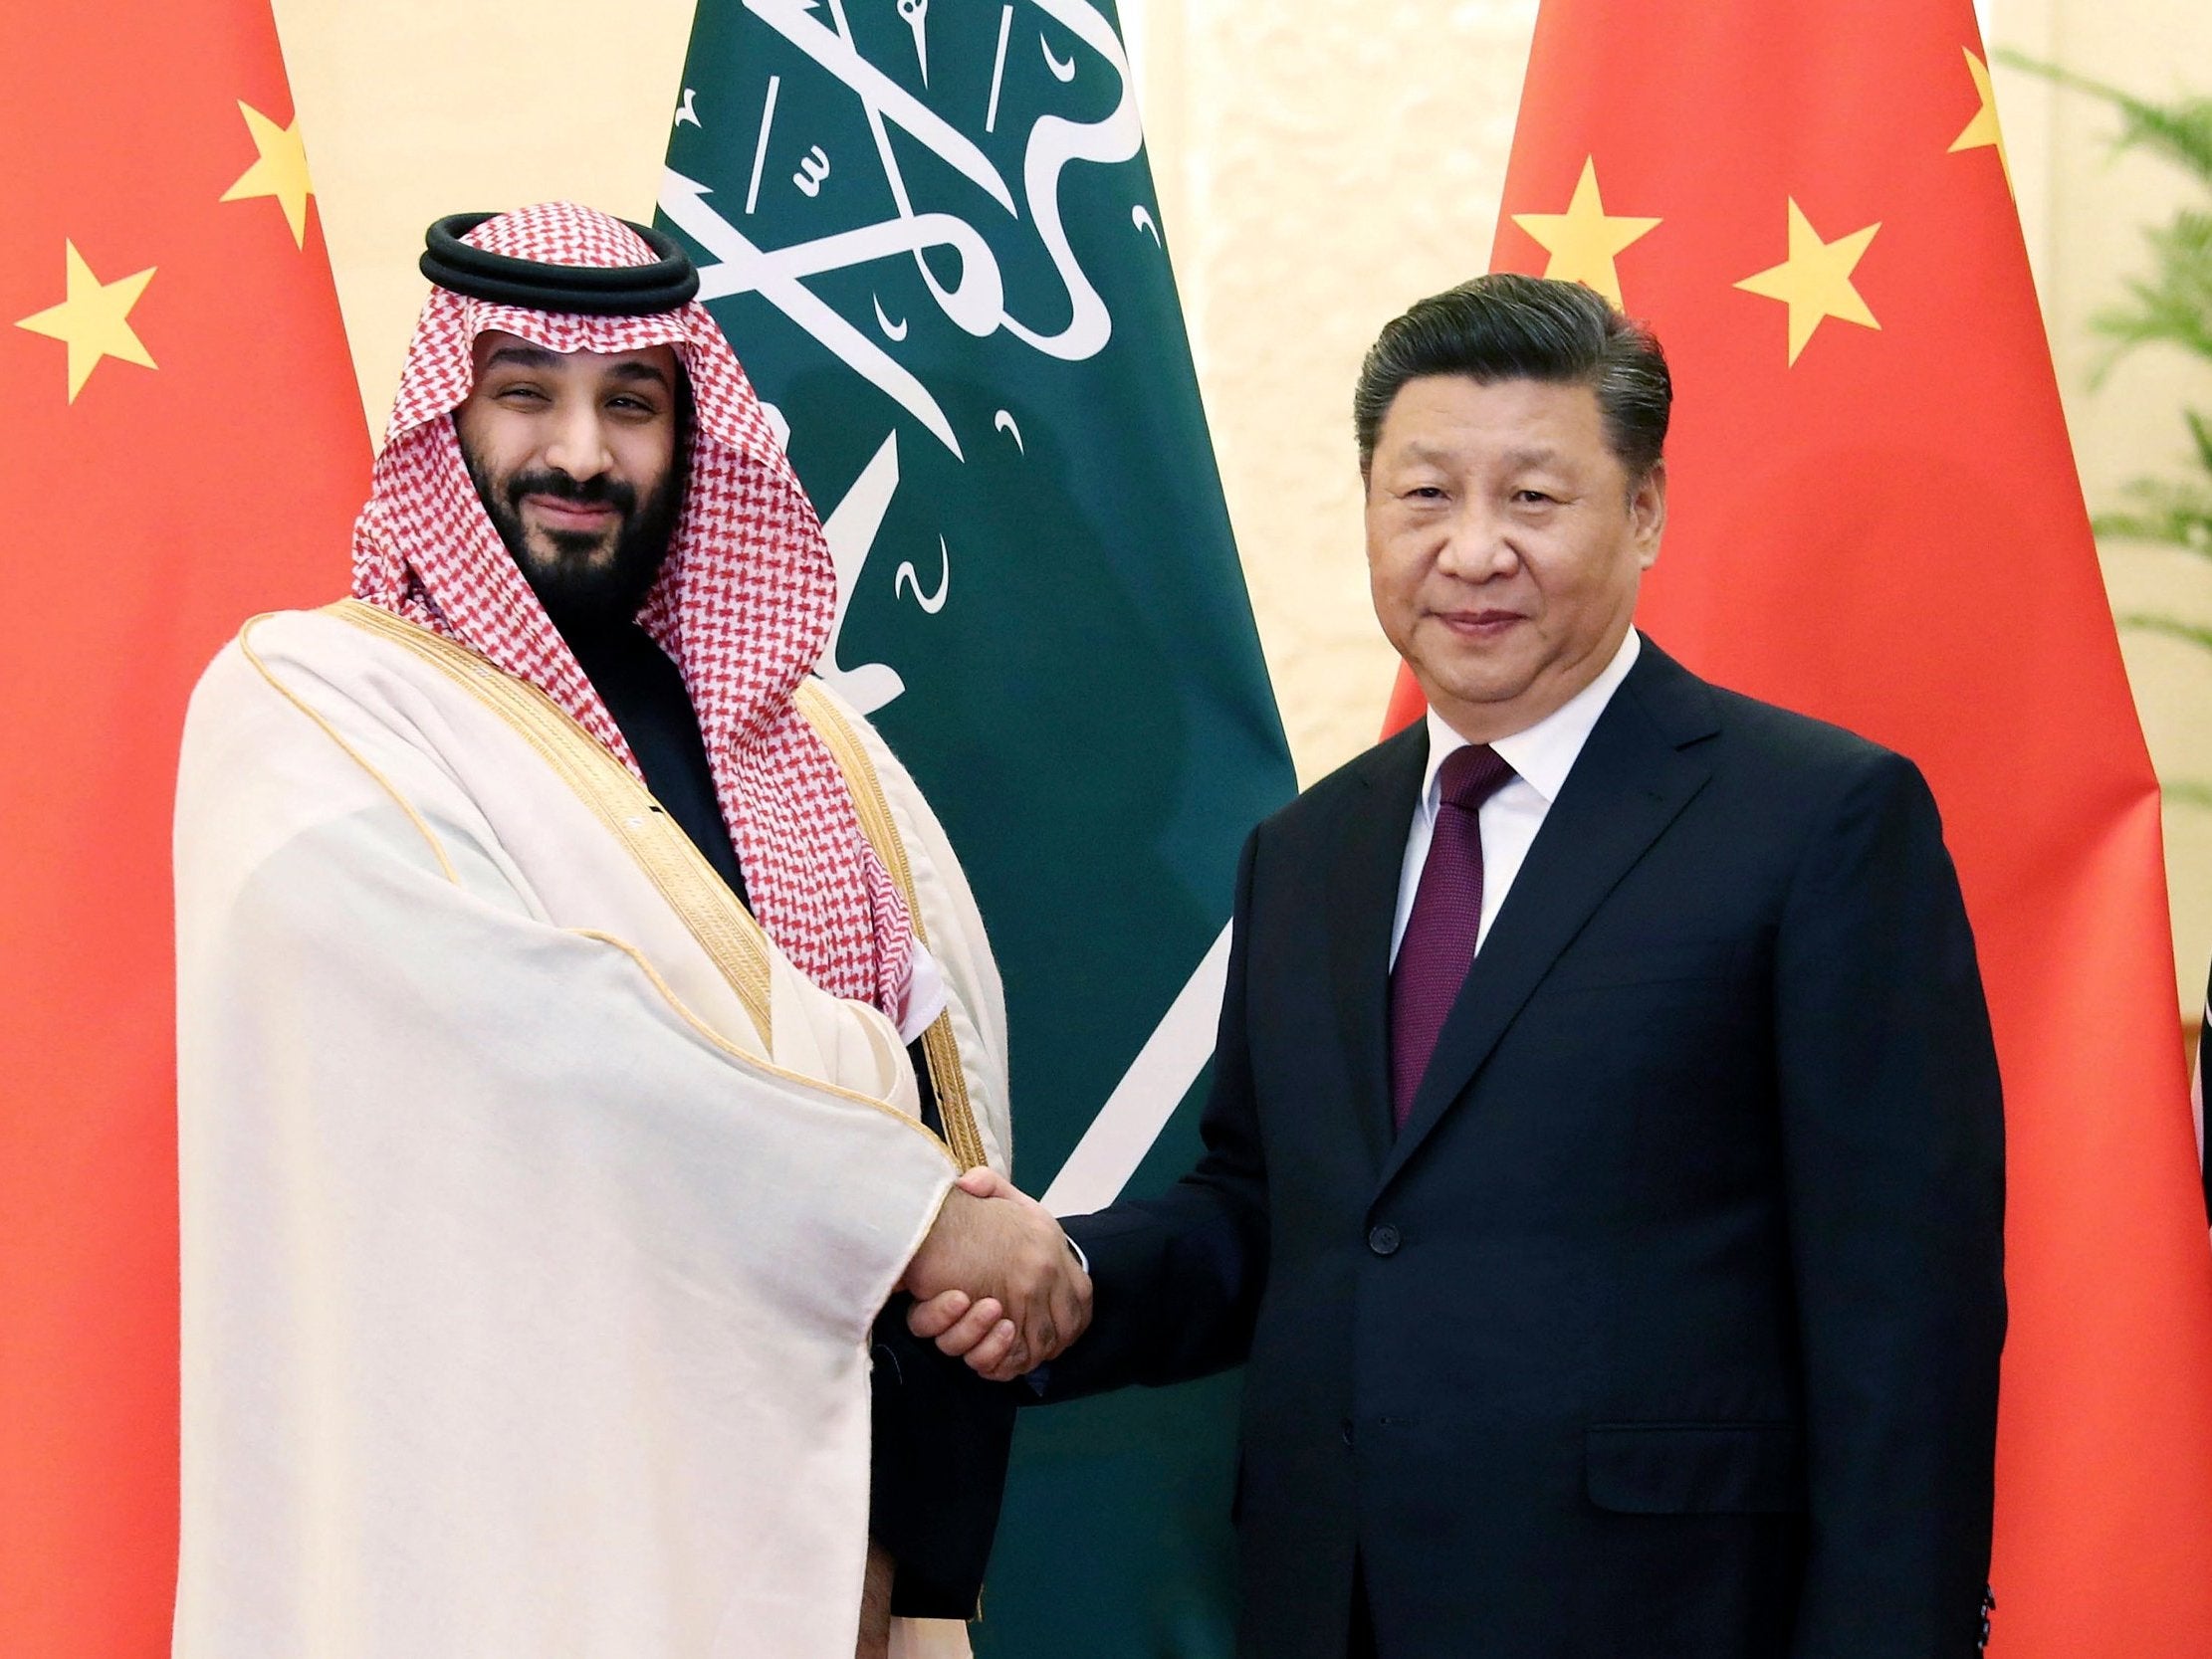 Saudi crown prince suggests China has 'right' to detain Uighur Muslims